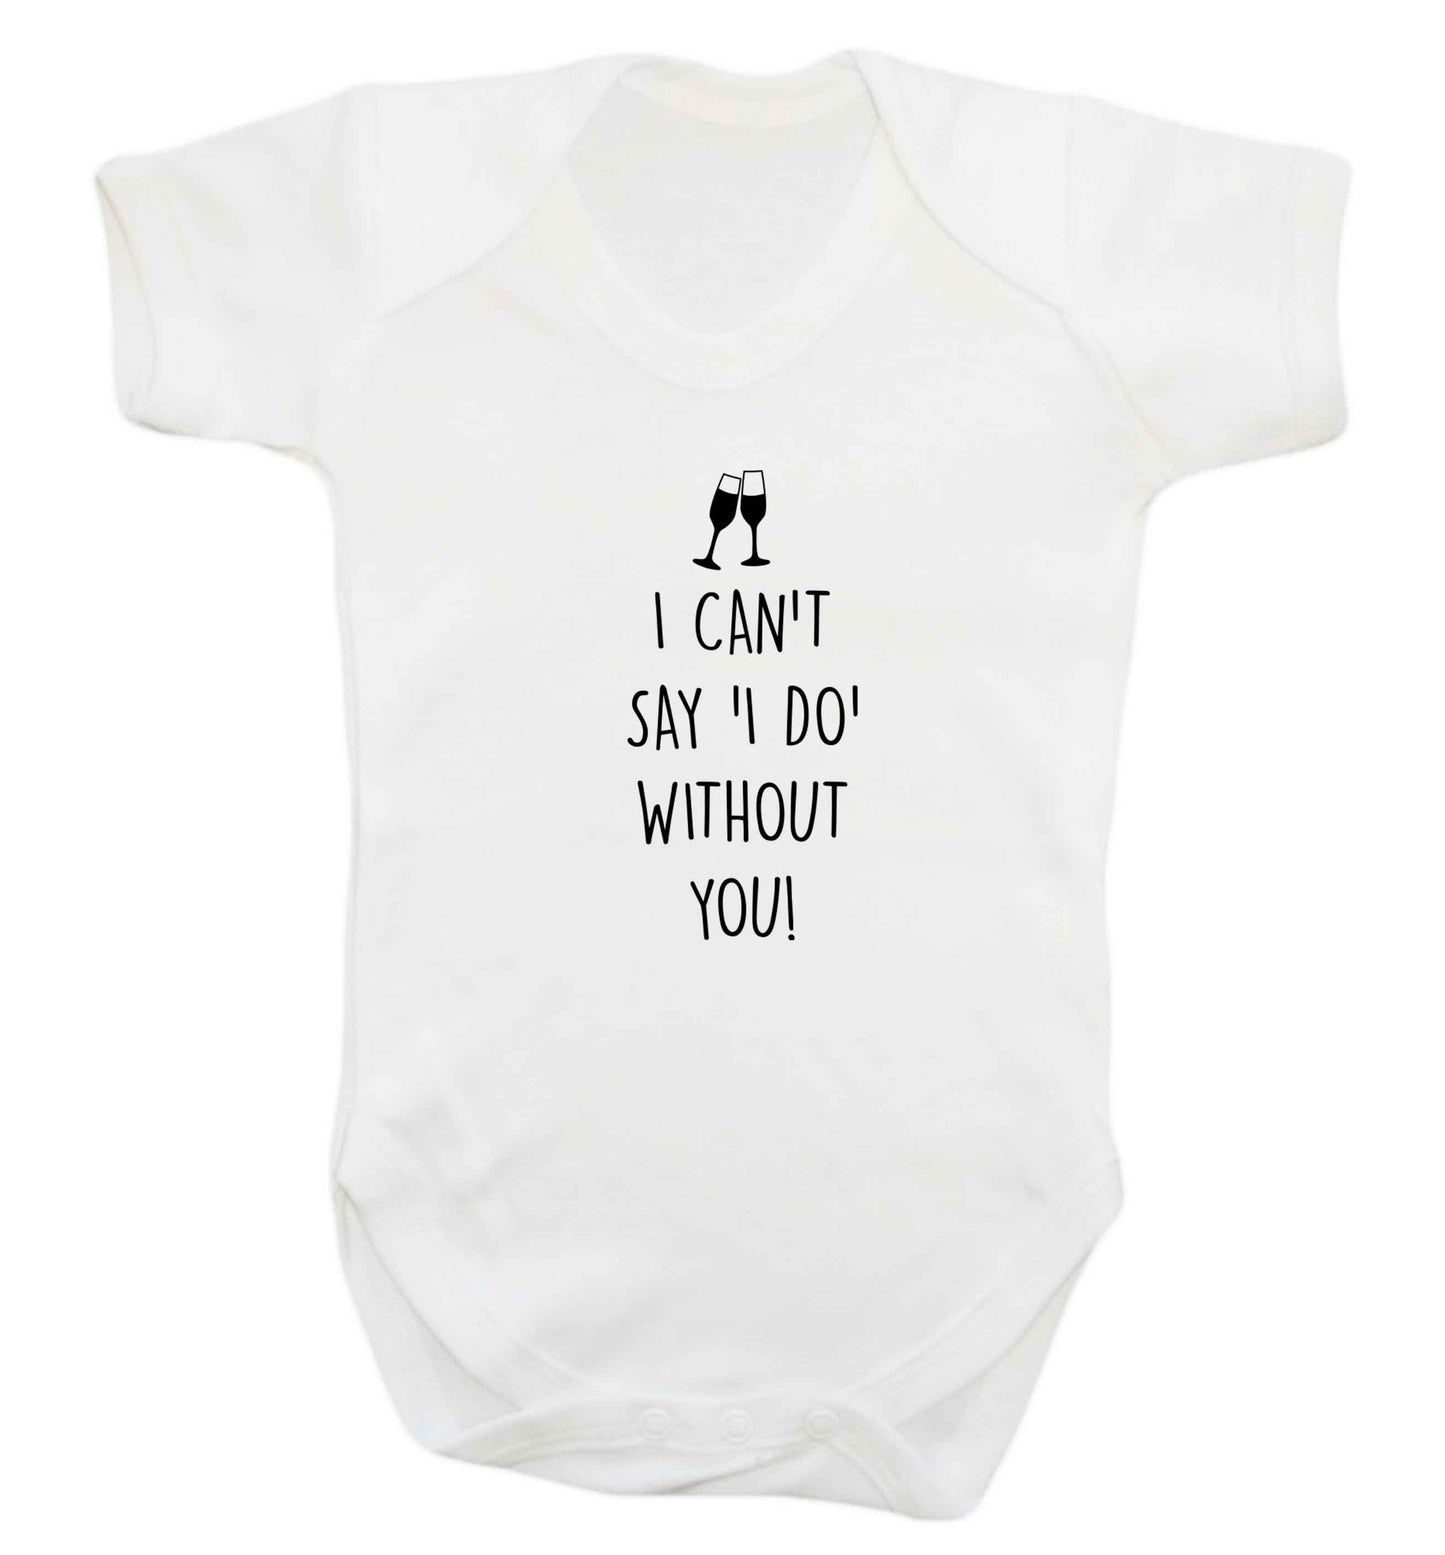 I can't say 'I do' without you! baby vest white 18-24 months